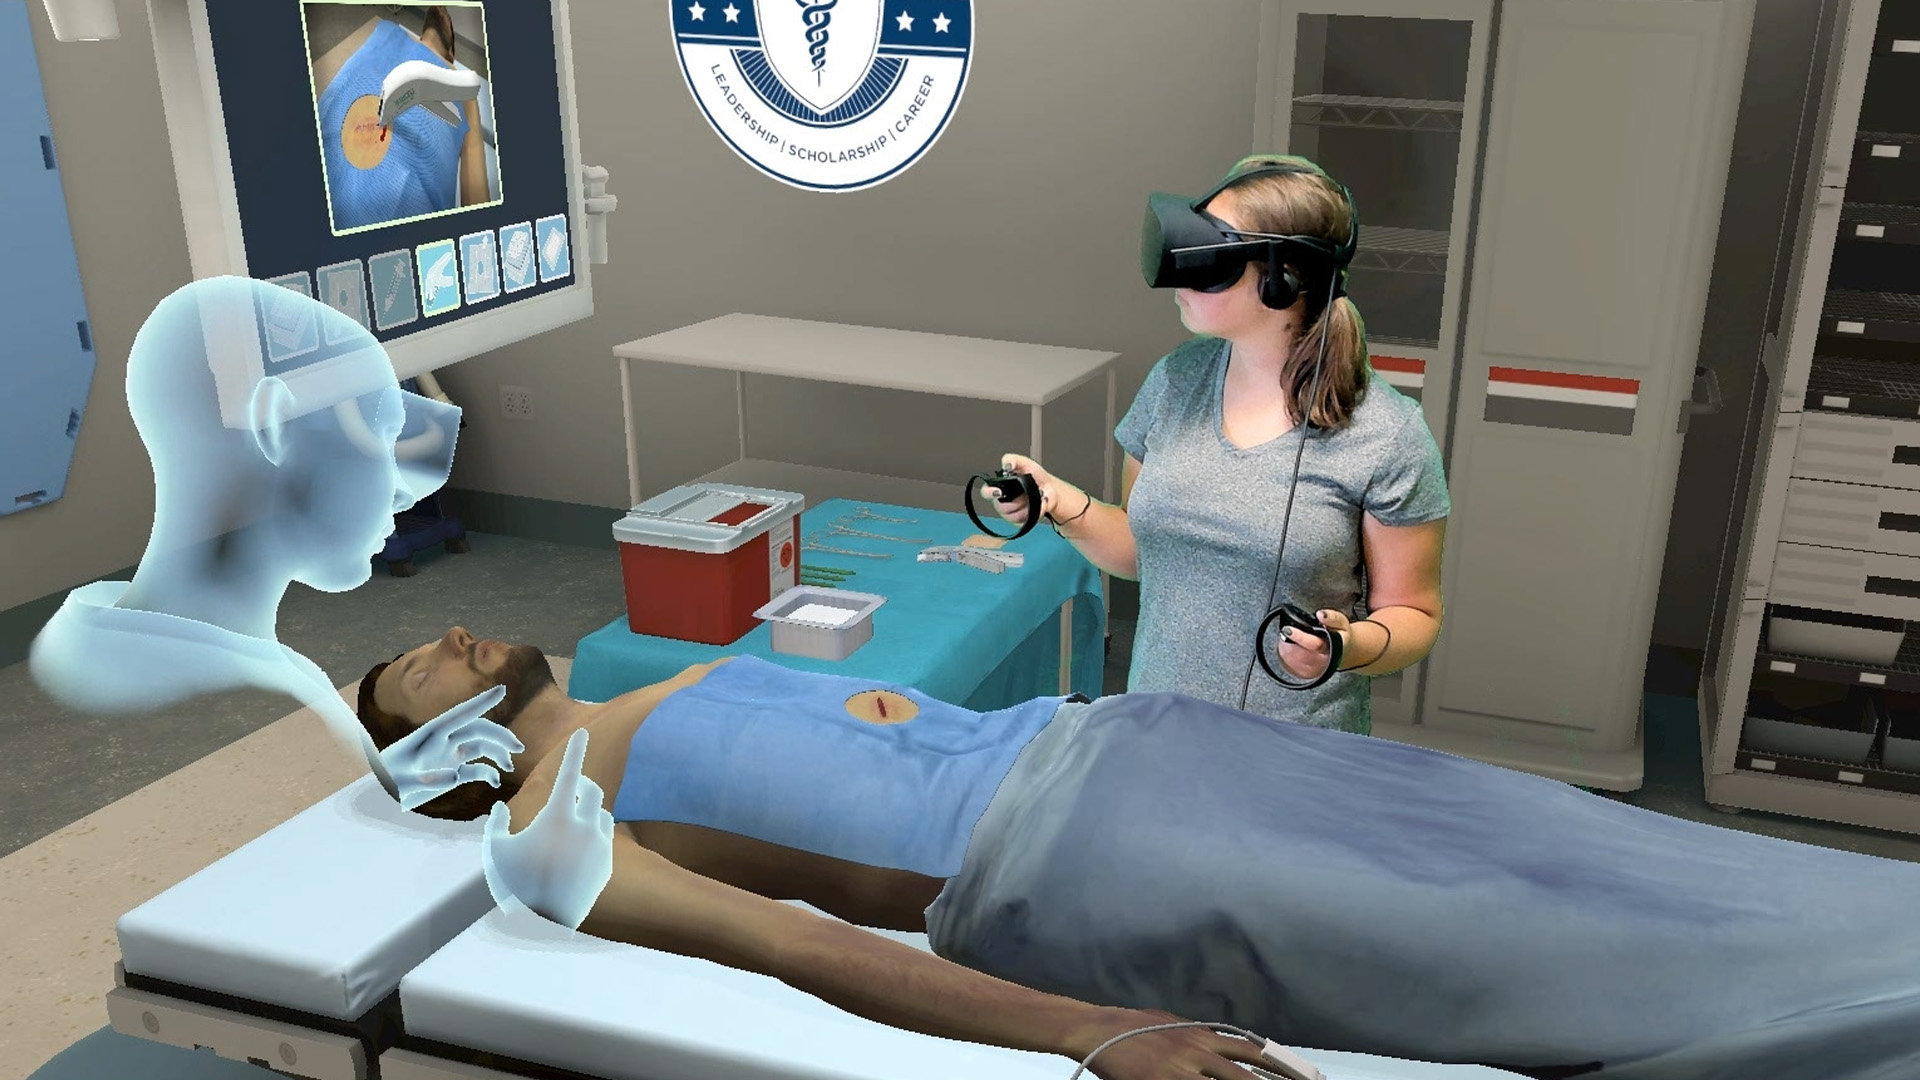 TREATING PATIENTS IN VIRTUAL AND REAL WORLDS WITH VR